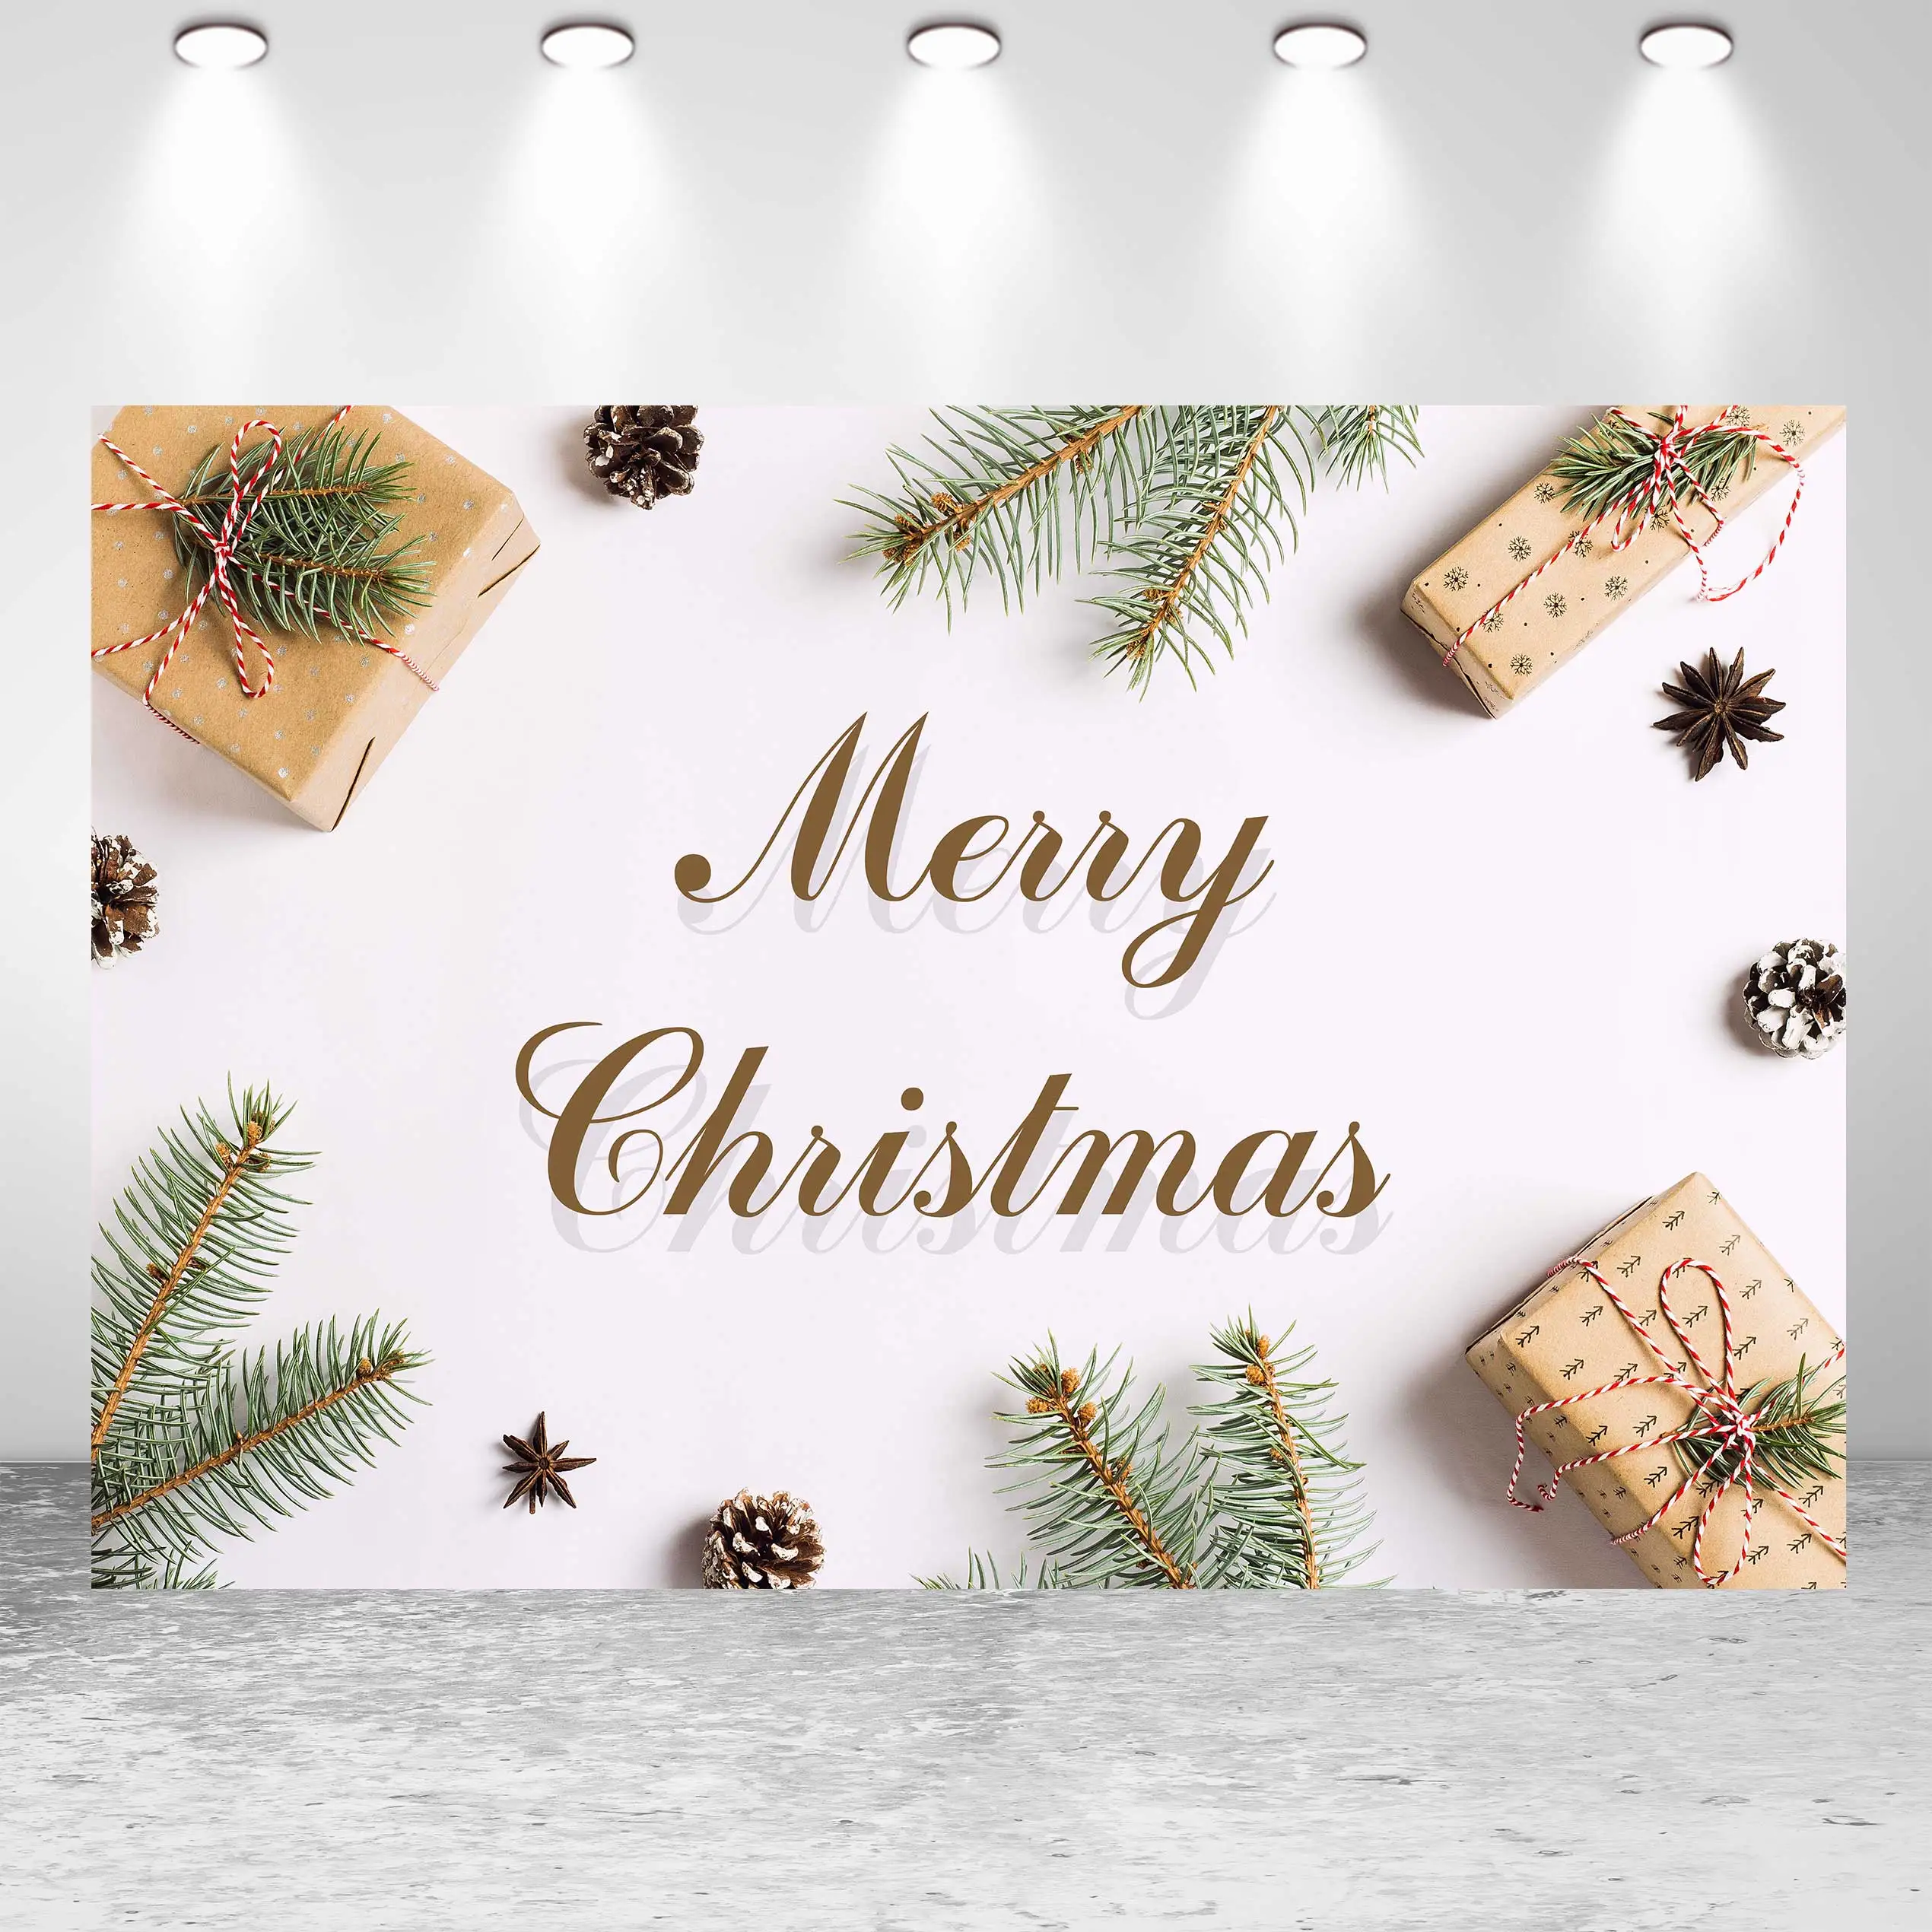 

NeoBack Merry Christmas Snow Pine cones Gift Christmas Tree Star Snowflake Party Banner Photo Backdrop Photography Background